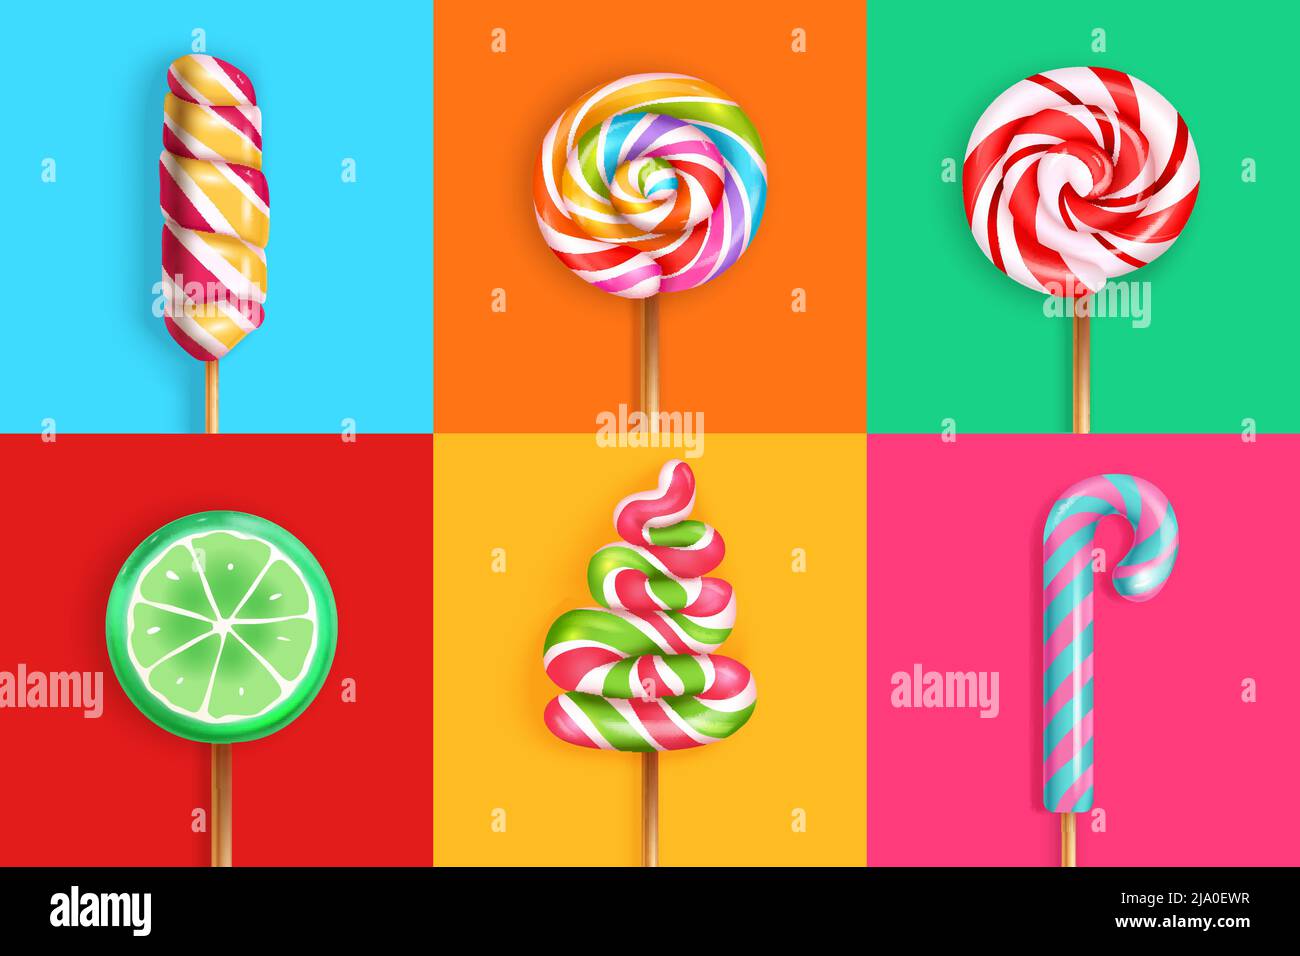 Lollipop candy concept 6 bright realistic background images with spiral rainbow striped cane lime slice vector illustration Stock Vector